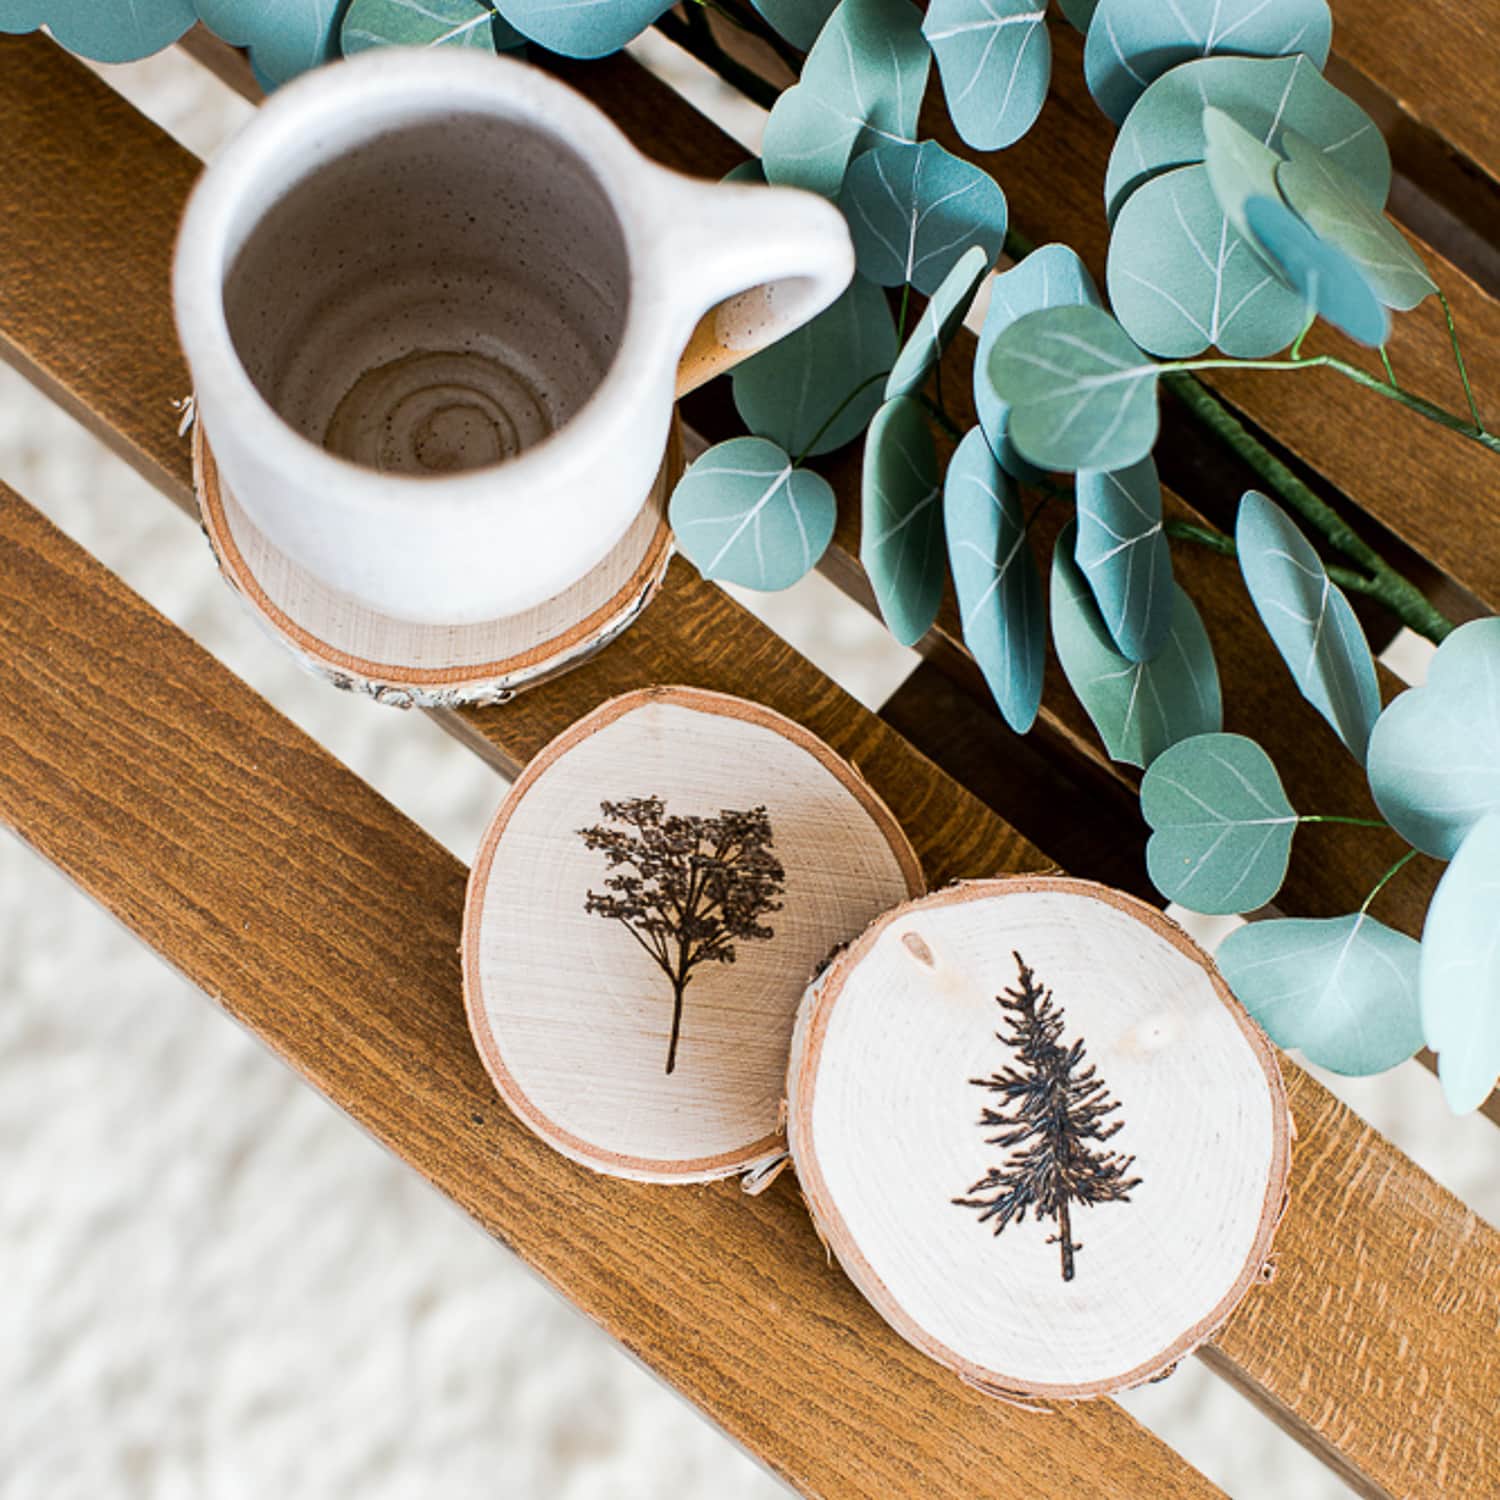 A Set of Birch Coasters | The Crafter's Box